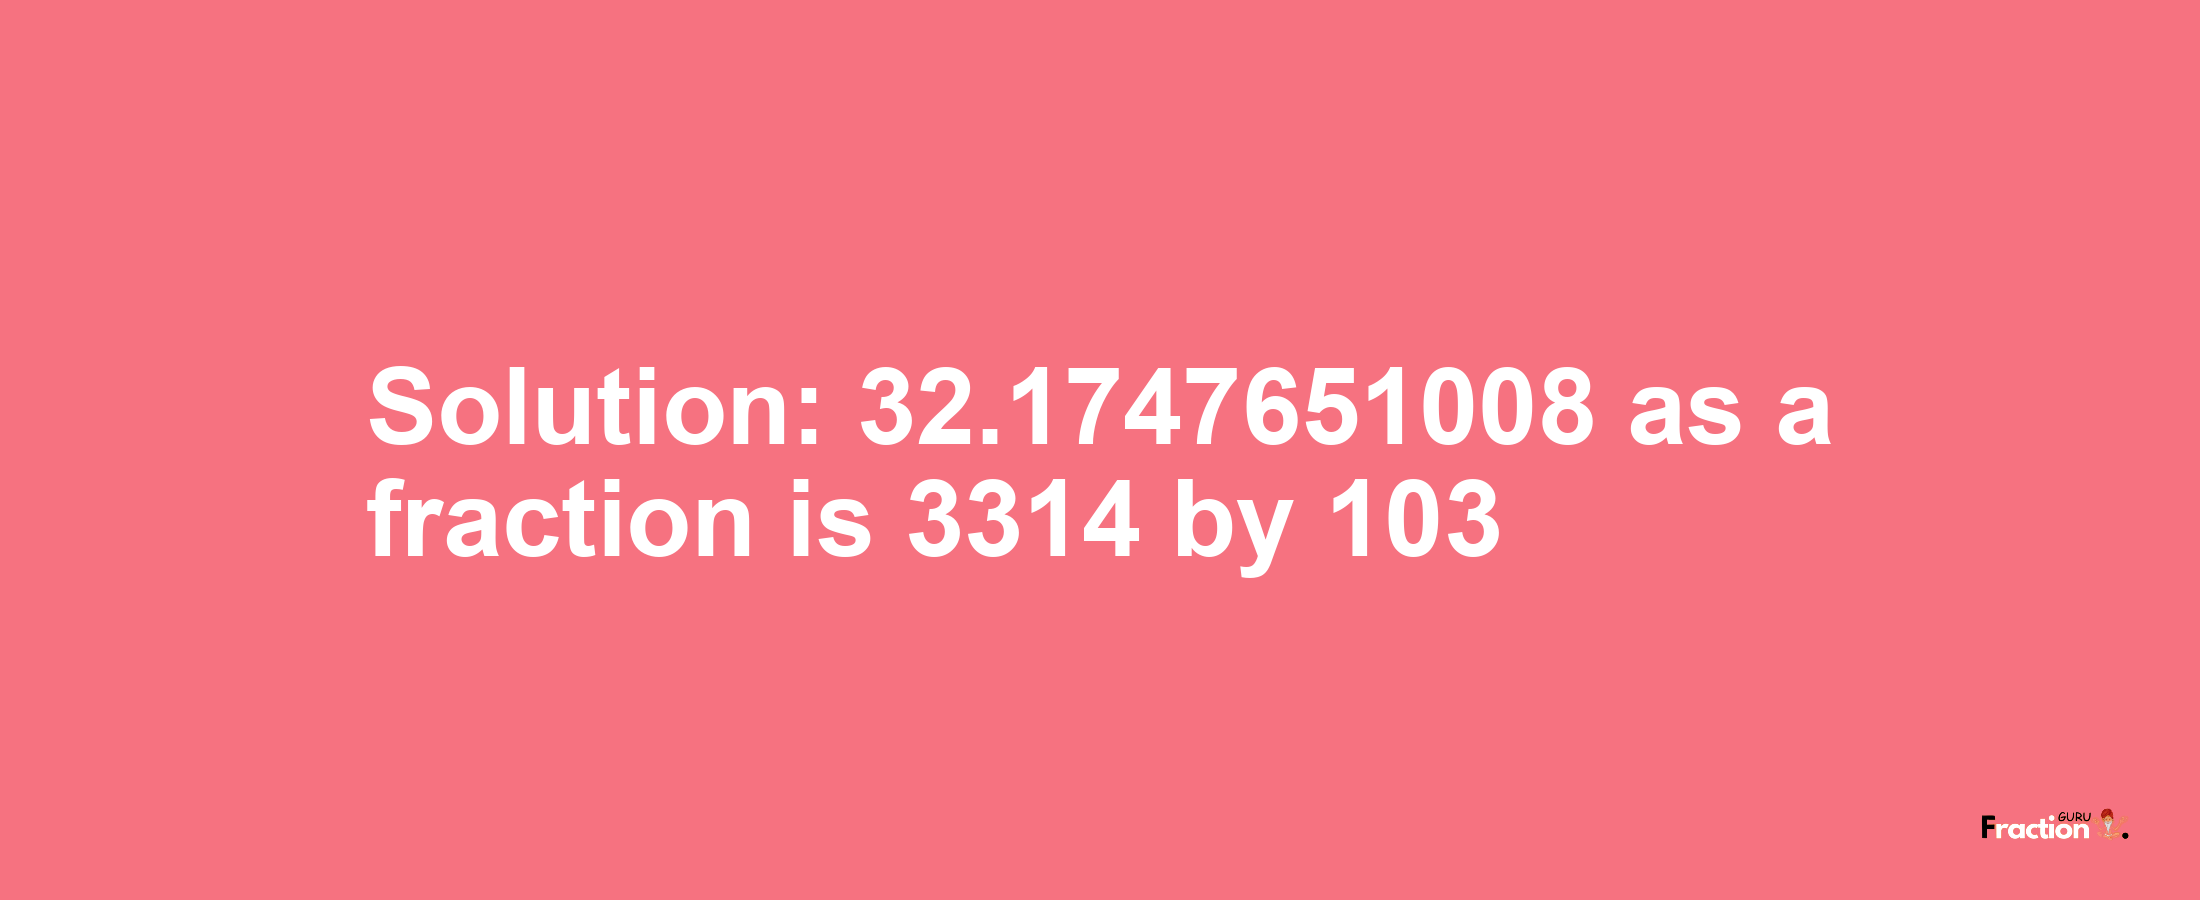 Solution:32.1747651008 as a fraction is 3314/103